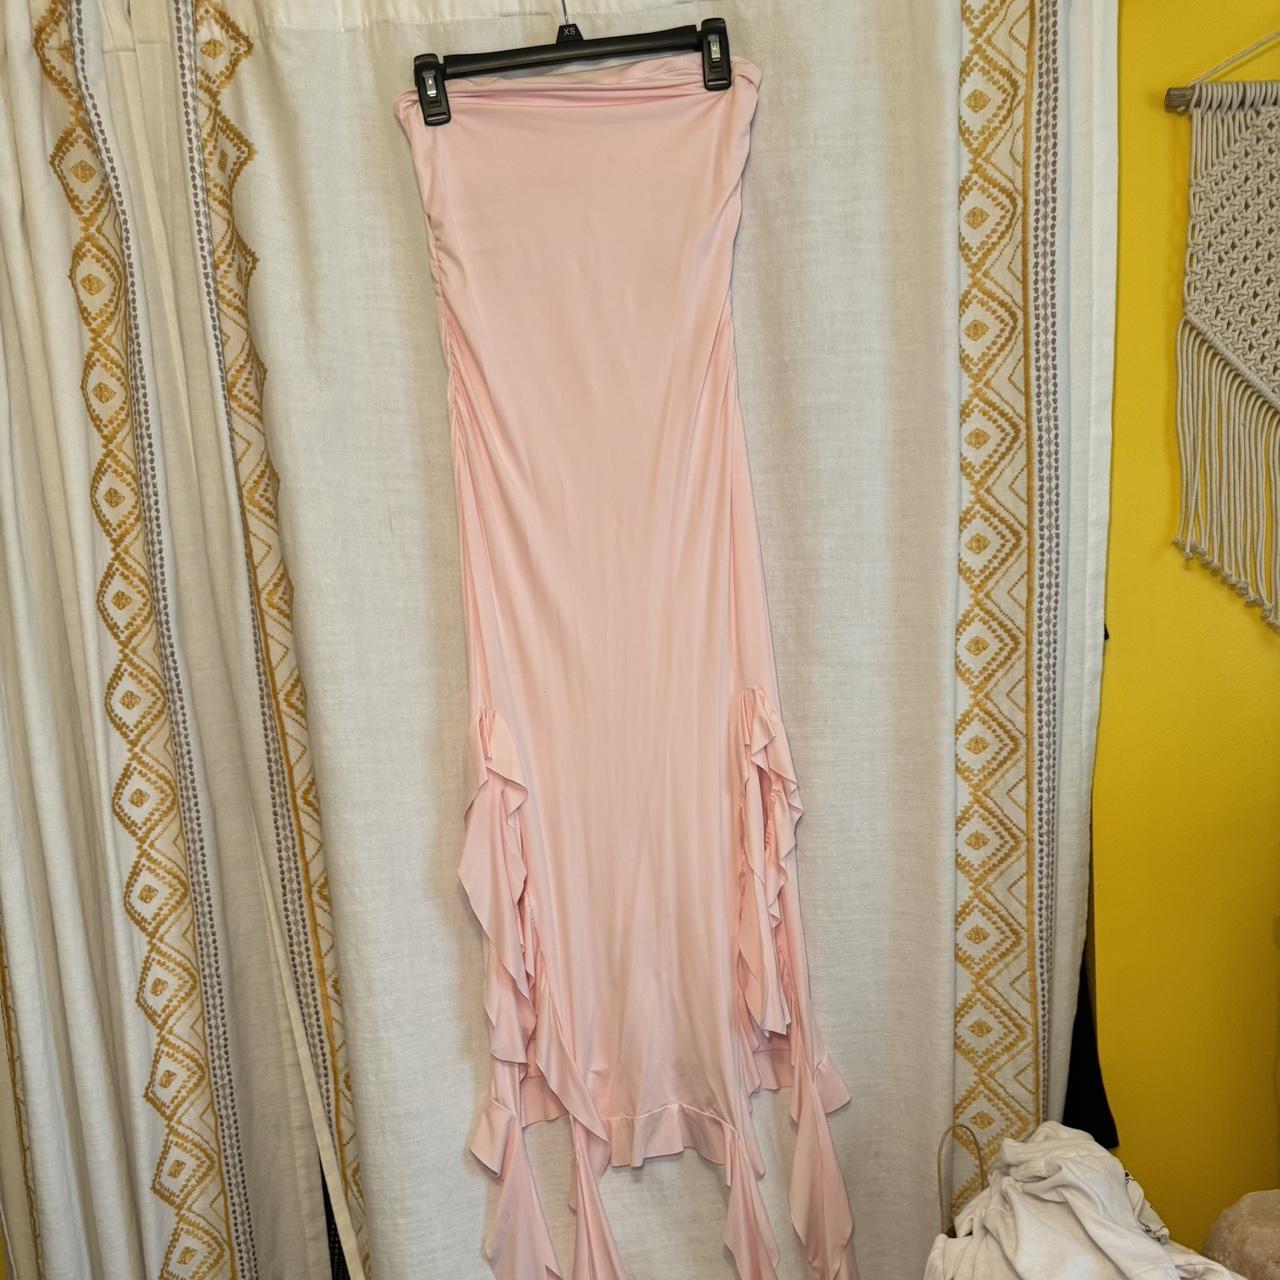 Pink Strapless Flowy Dress. Only worn once - Depop